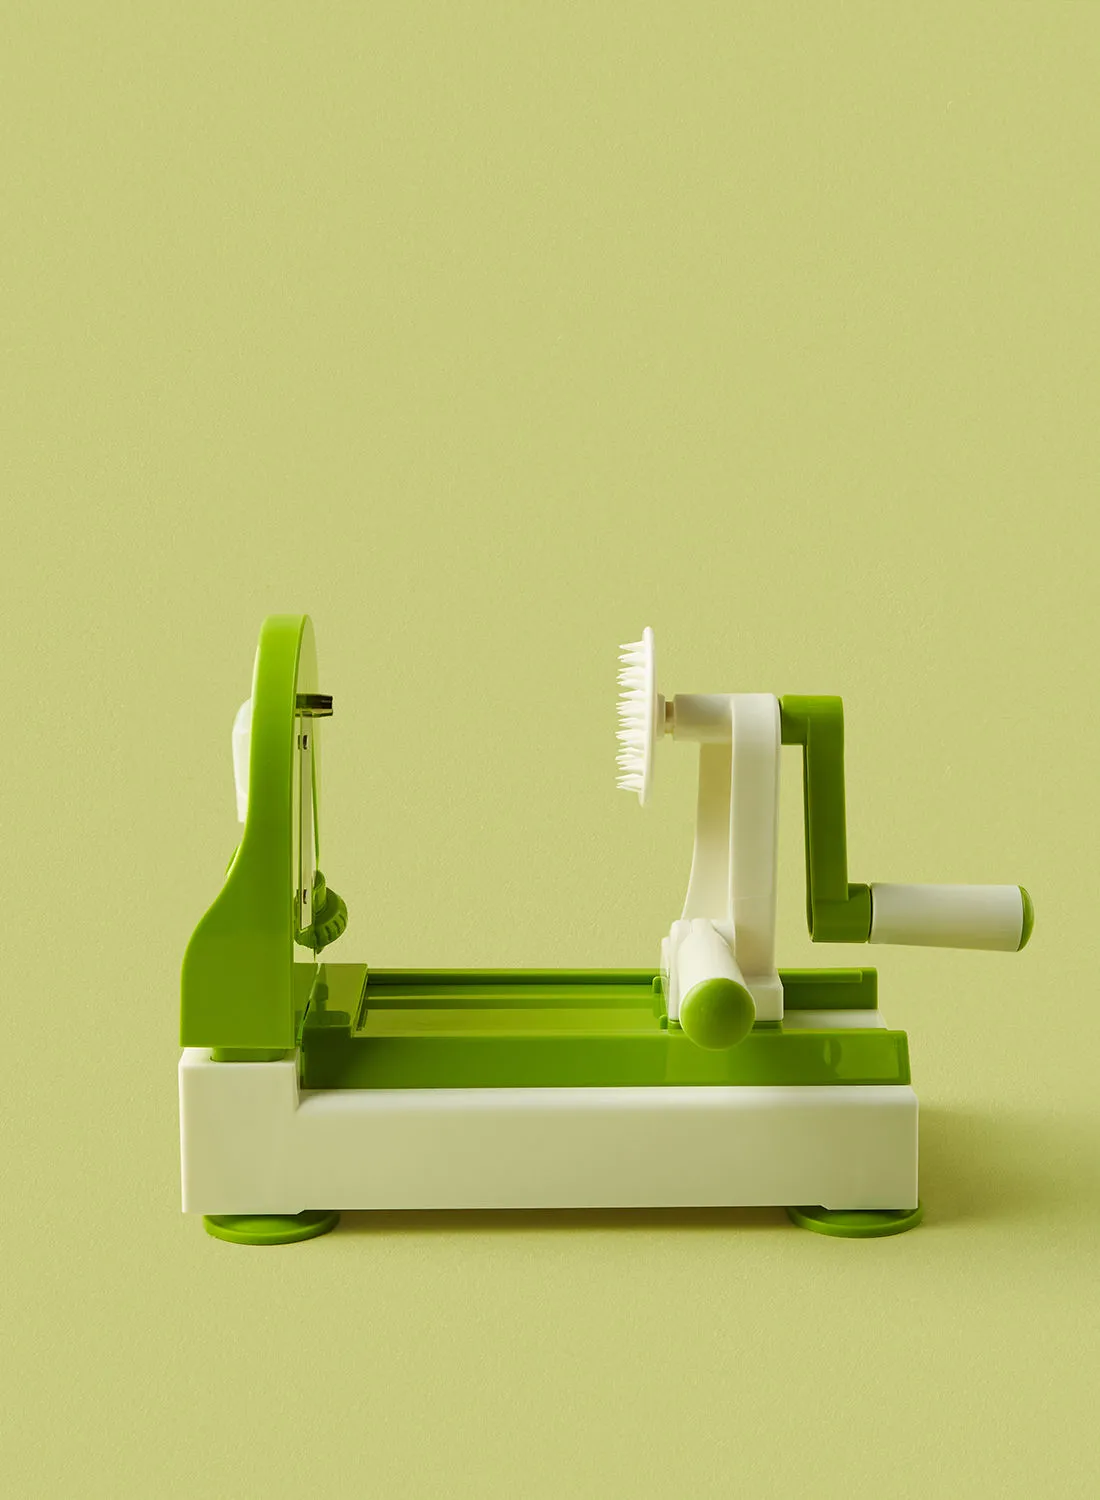 noon east Spliralizer - Manual - And Vegetables - Kitchen Accessories - Kitchen Tool - Fruits - Vegetable Slicer - Green/White